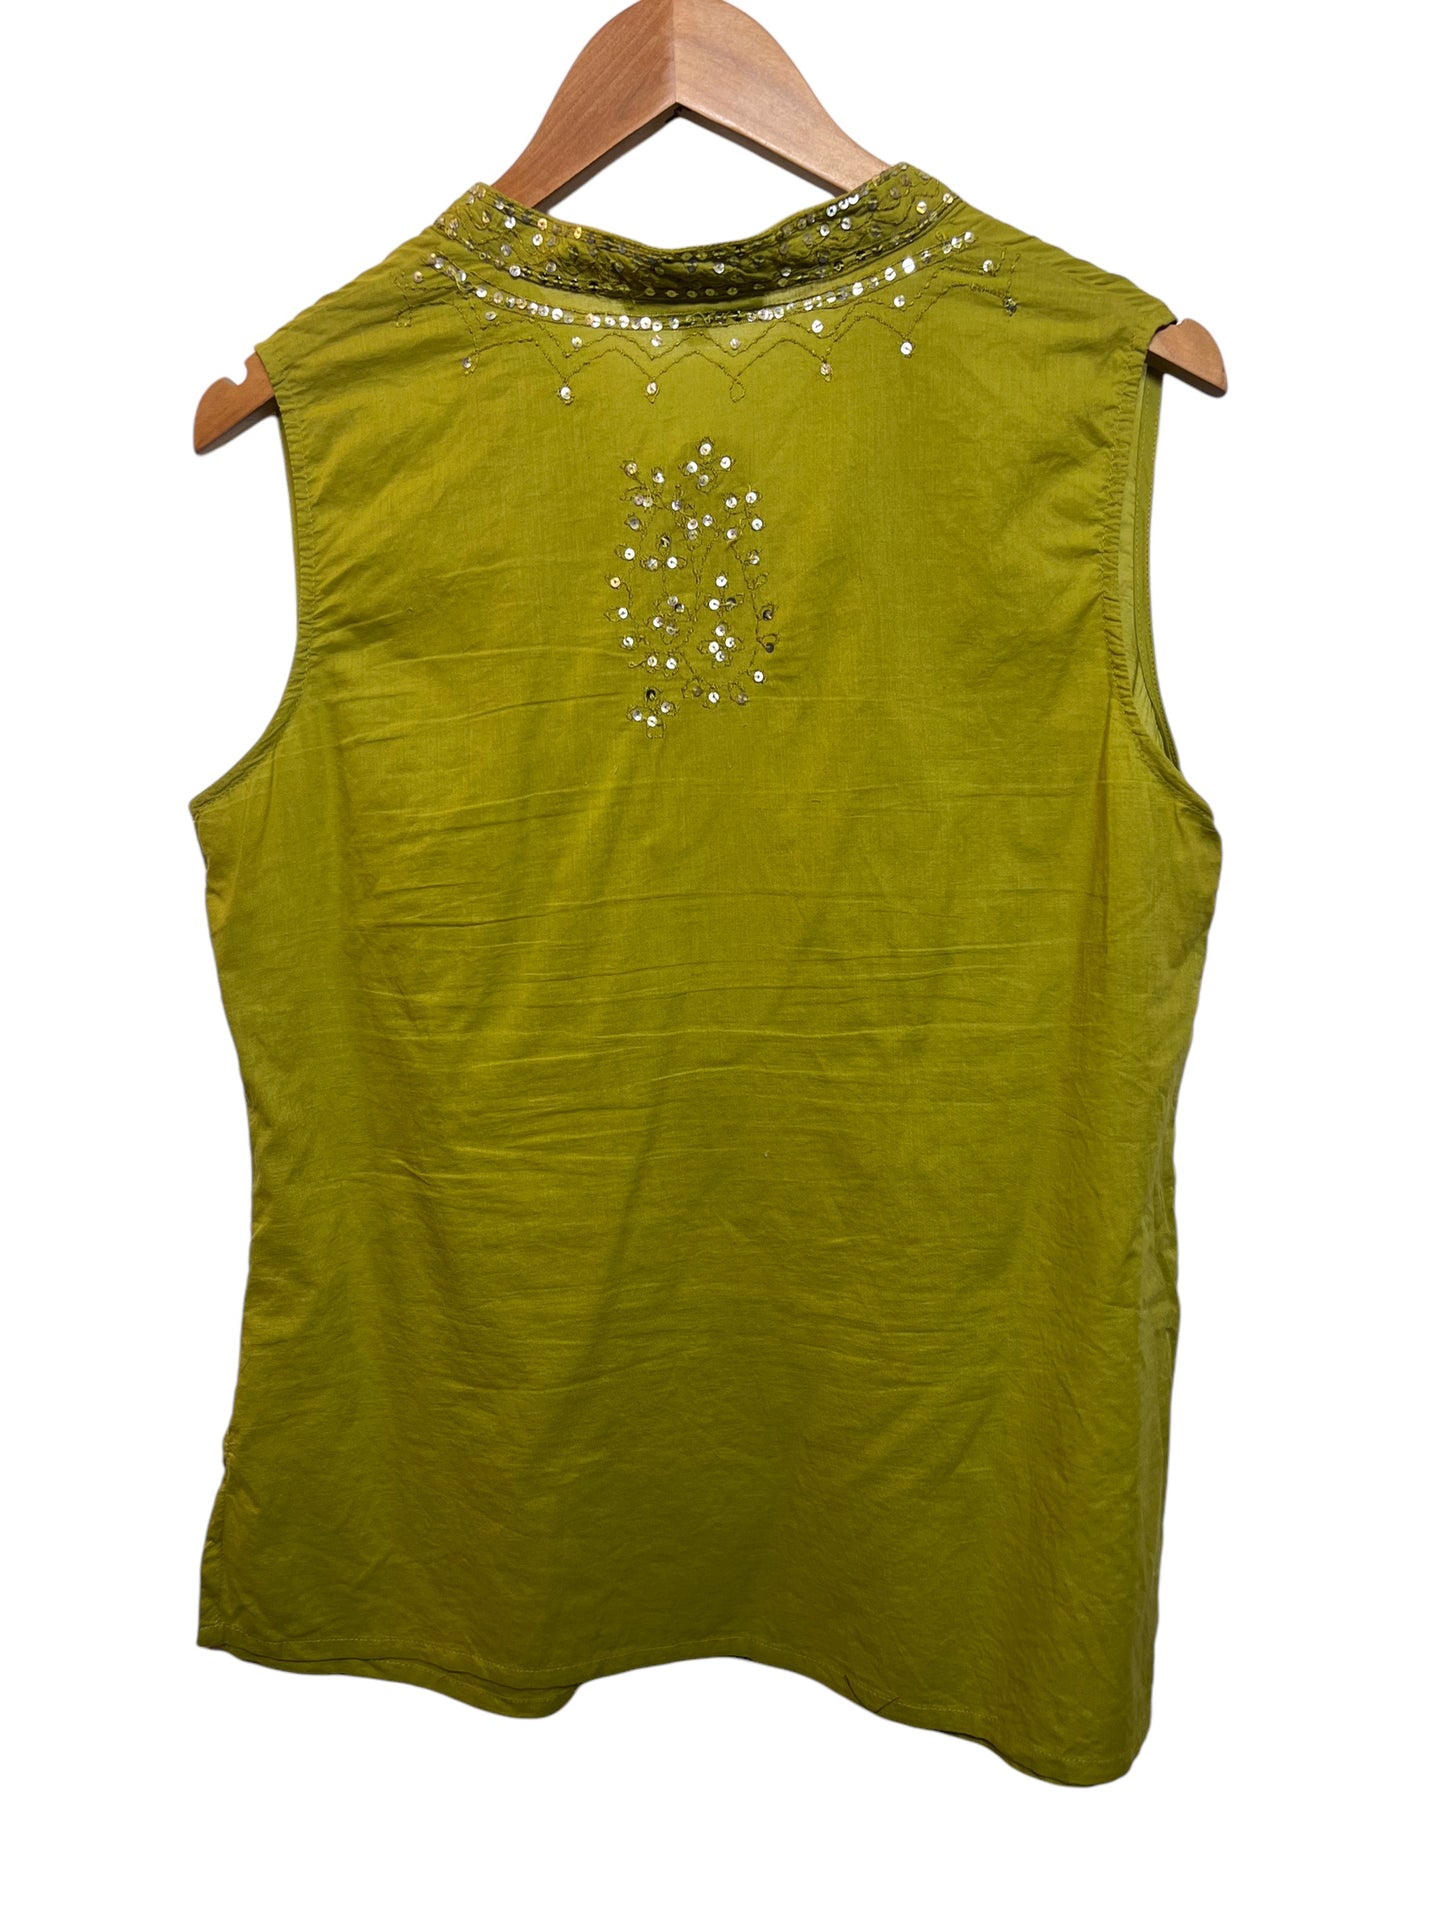 Willow Blossom Women’s Green Top (Size L)